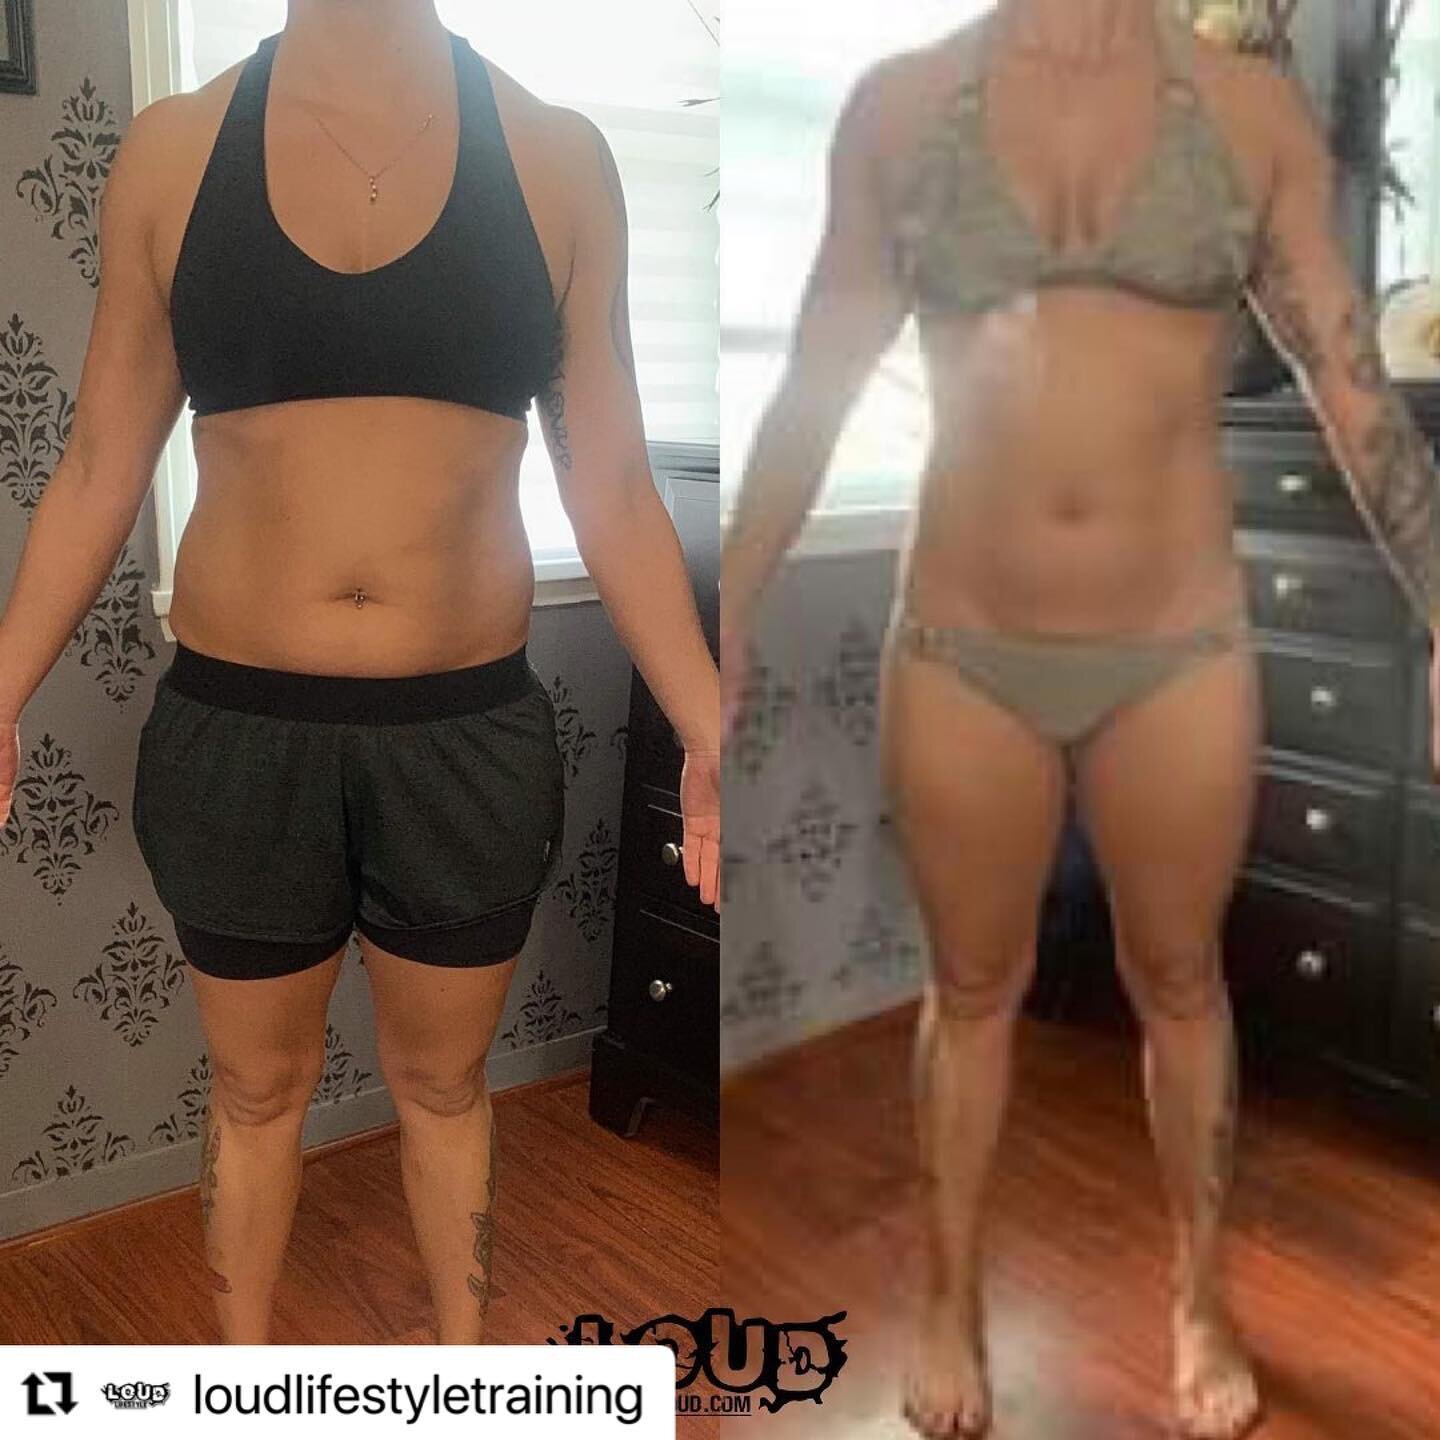 #Repost @loudlifestyletraining with @make_repost
・・・
Shout out to client Amy on the hard work she&rsquo;s put in thus far!
➖
Amy has been working with me since May of 2020. The goal was to lose a bit of bodyfat for a leaner and more athletic physique